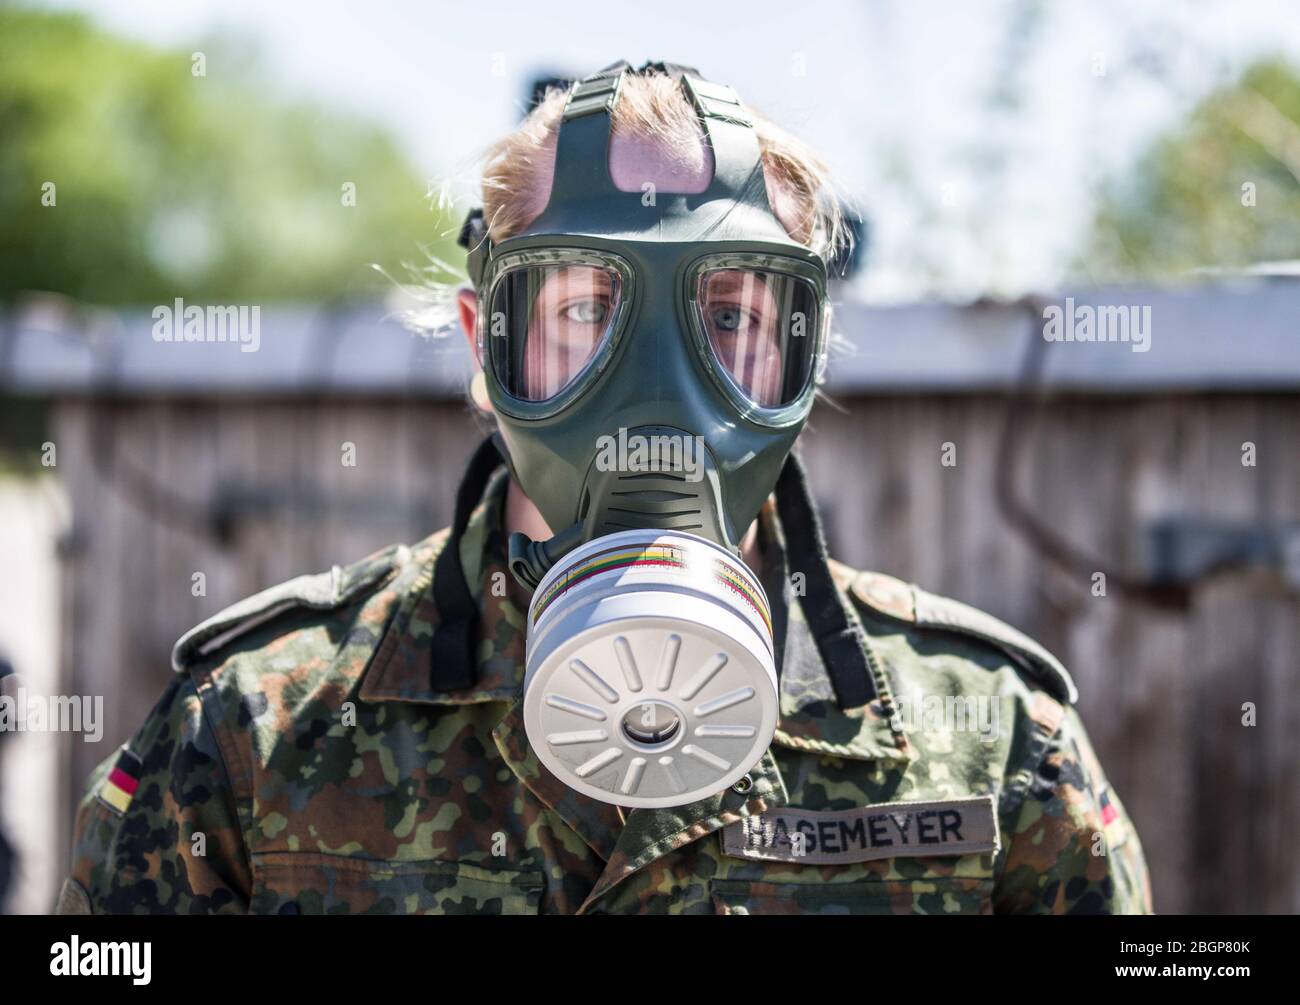 Neubiberg Bei Muenchen, Bavaria, Germany. 22nd Apr, 2020. German Bundeswehr soldiers wear gas masks and Dupint TyChem C protective clothing while mixing the constituents together to make Oxicide, a surface disinfectant used in the fight against Coronavirus. At the Bundeswehr Universitaet (Military University of Germany) in Neubiberg near Munich. Germany is currently at 148,174 positive diagnoses with 4,961 deaths. Credit: Sachelle Babbar/ZUMA Wire/Alamy Live News Stock Photo